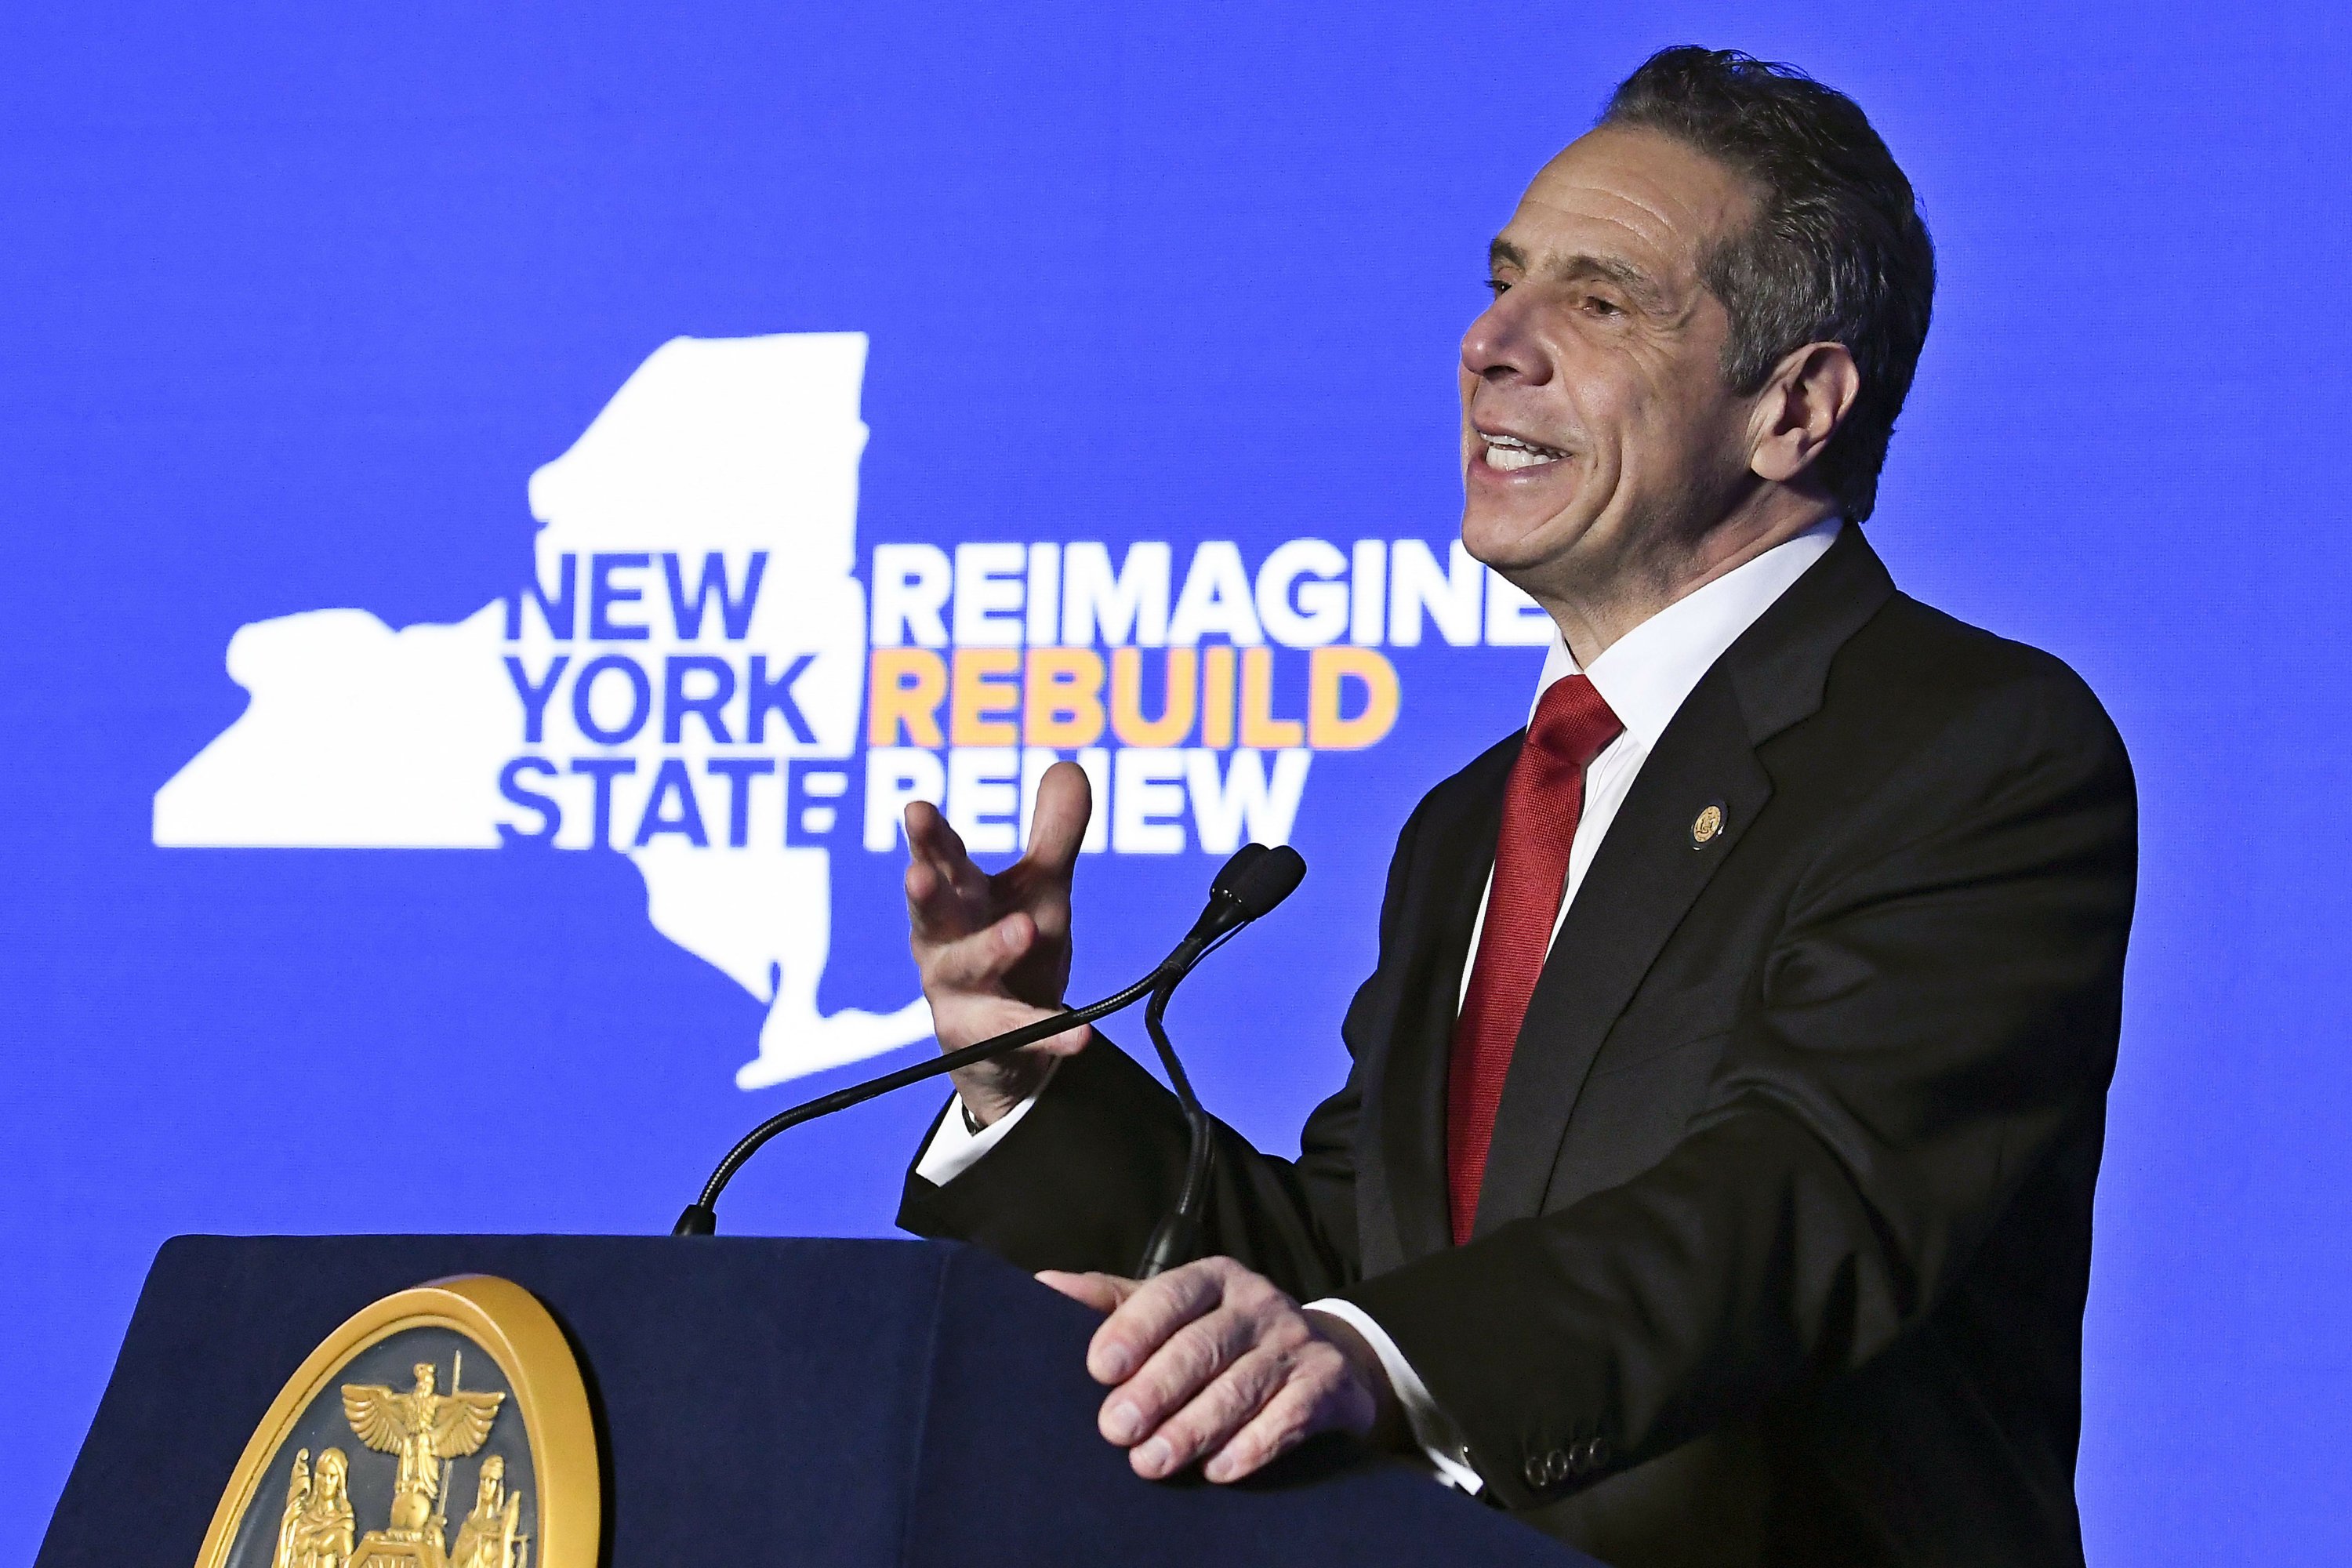 NY counted fewer deaths in nursing homes in thousands, AG says